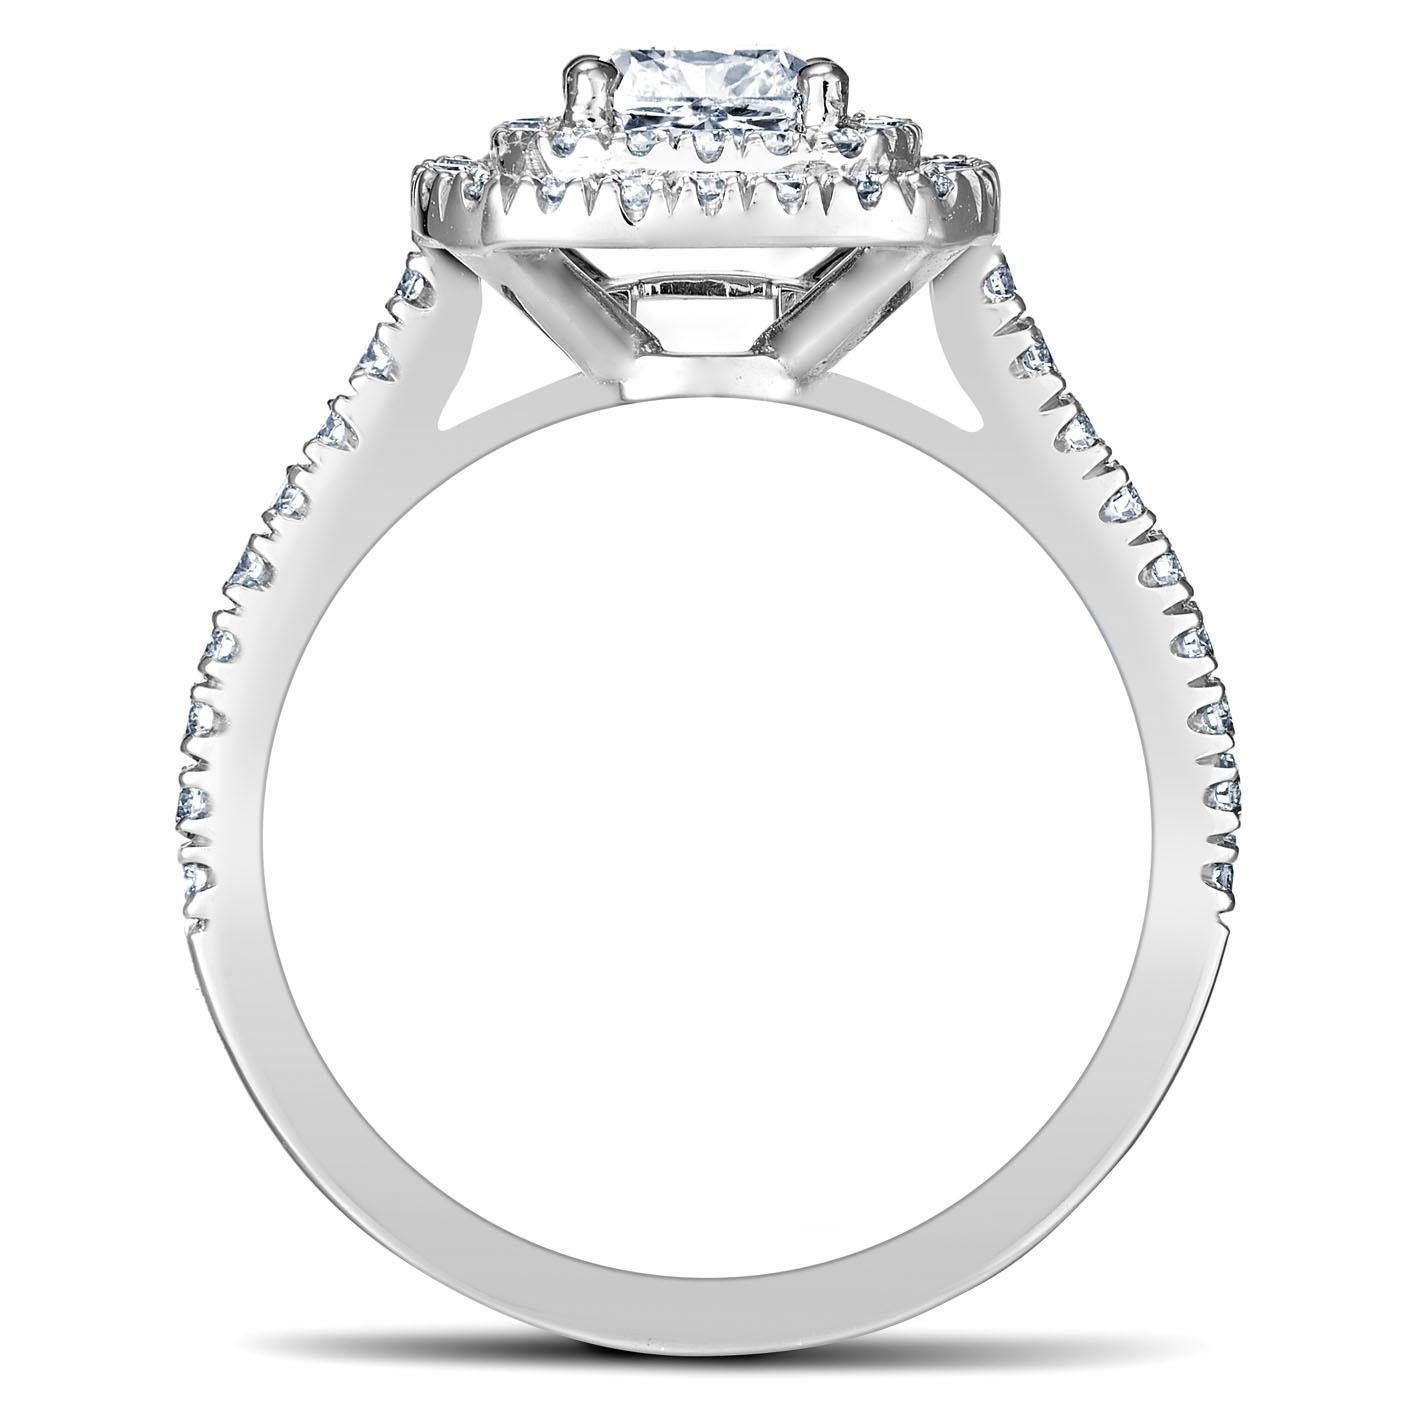 For Sale:  Art Deco Style 18k White Gold 0.70 Ct Diamond Ring GIA Certified with 0.55 Cts 2